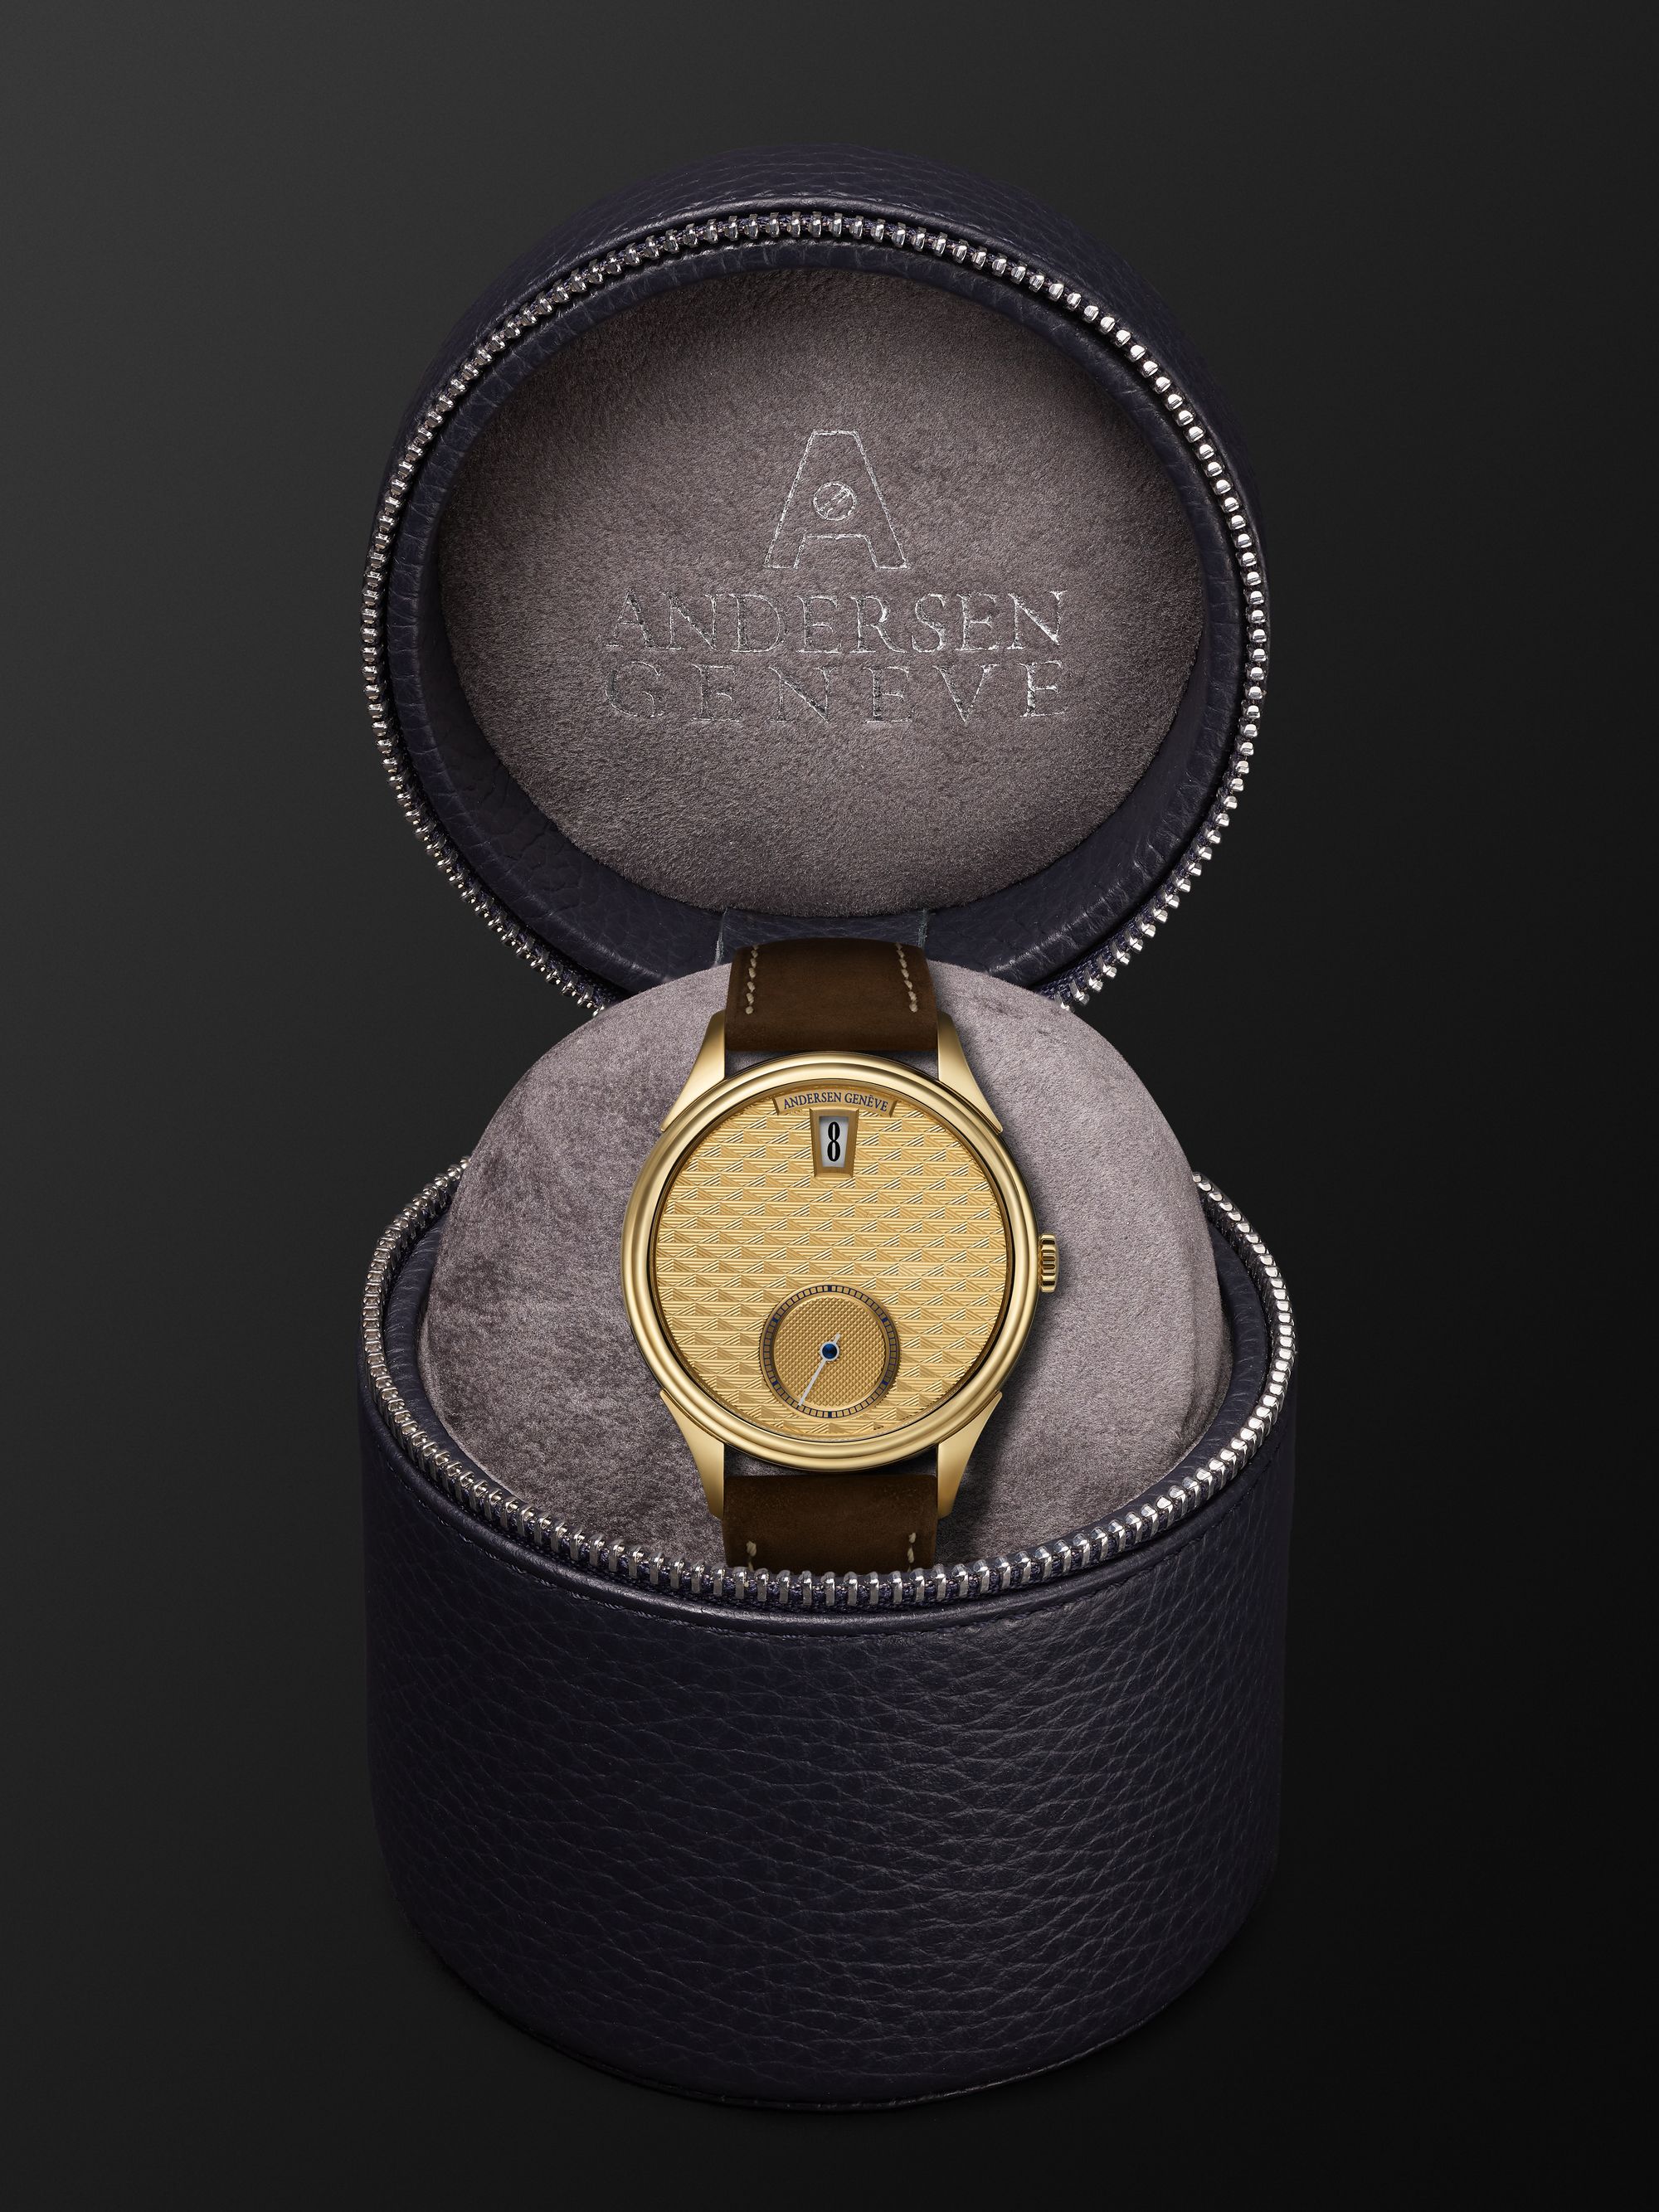 ANDERSEN GENEVE Jumping Hours Automatic 38mm Gold and Leather Watch